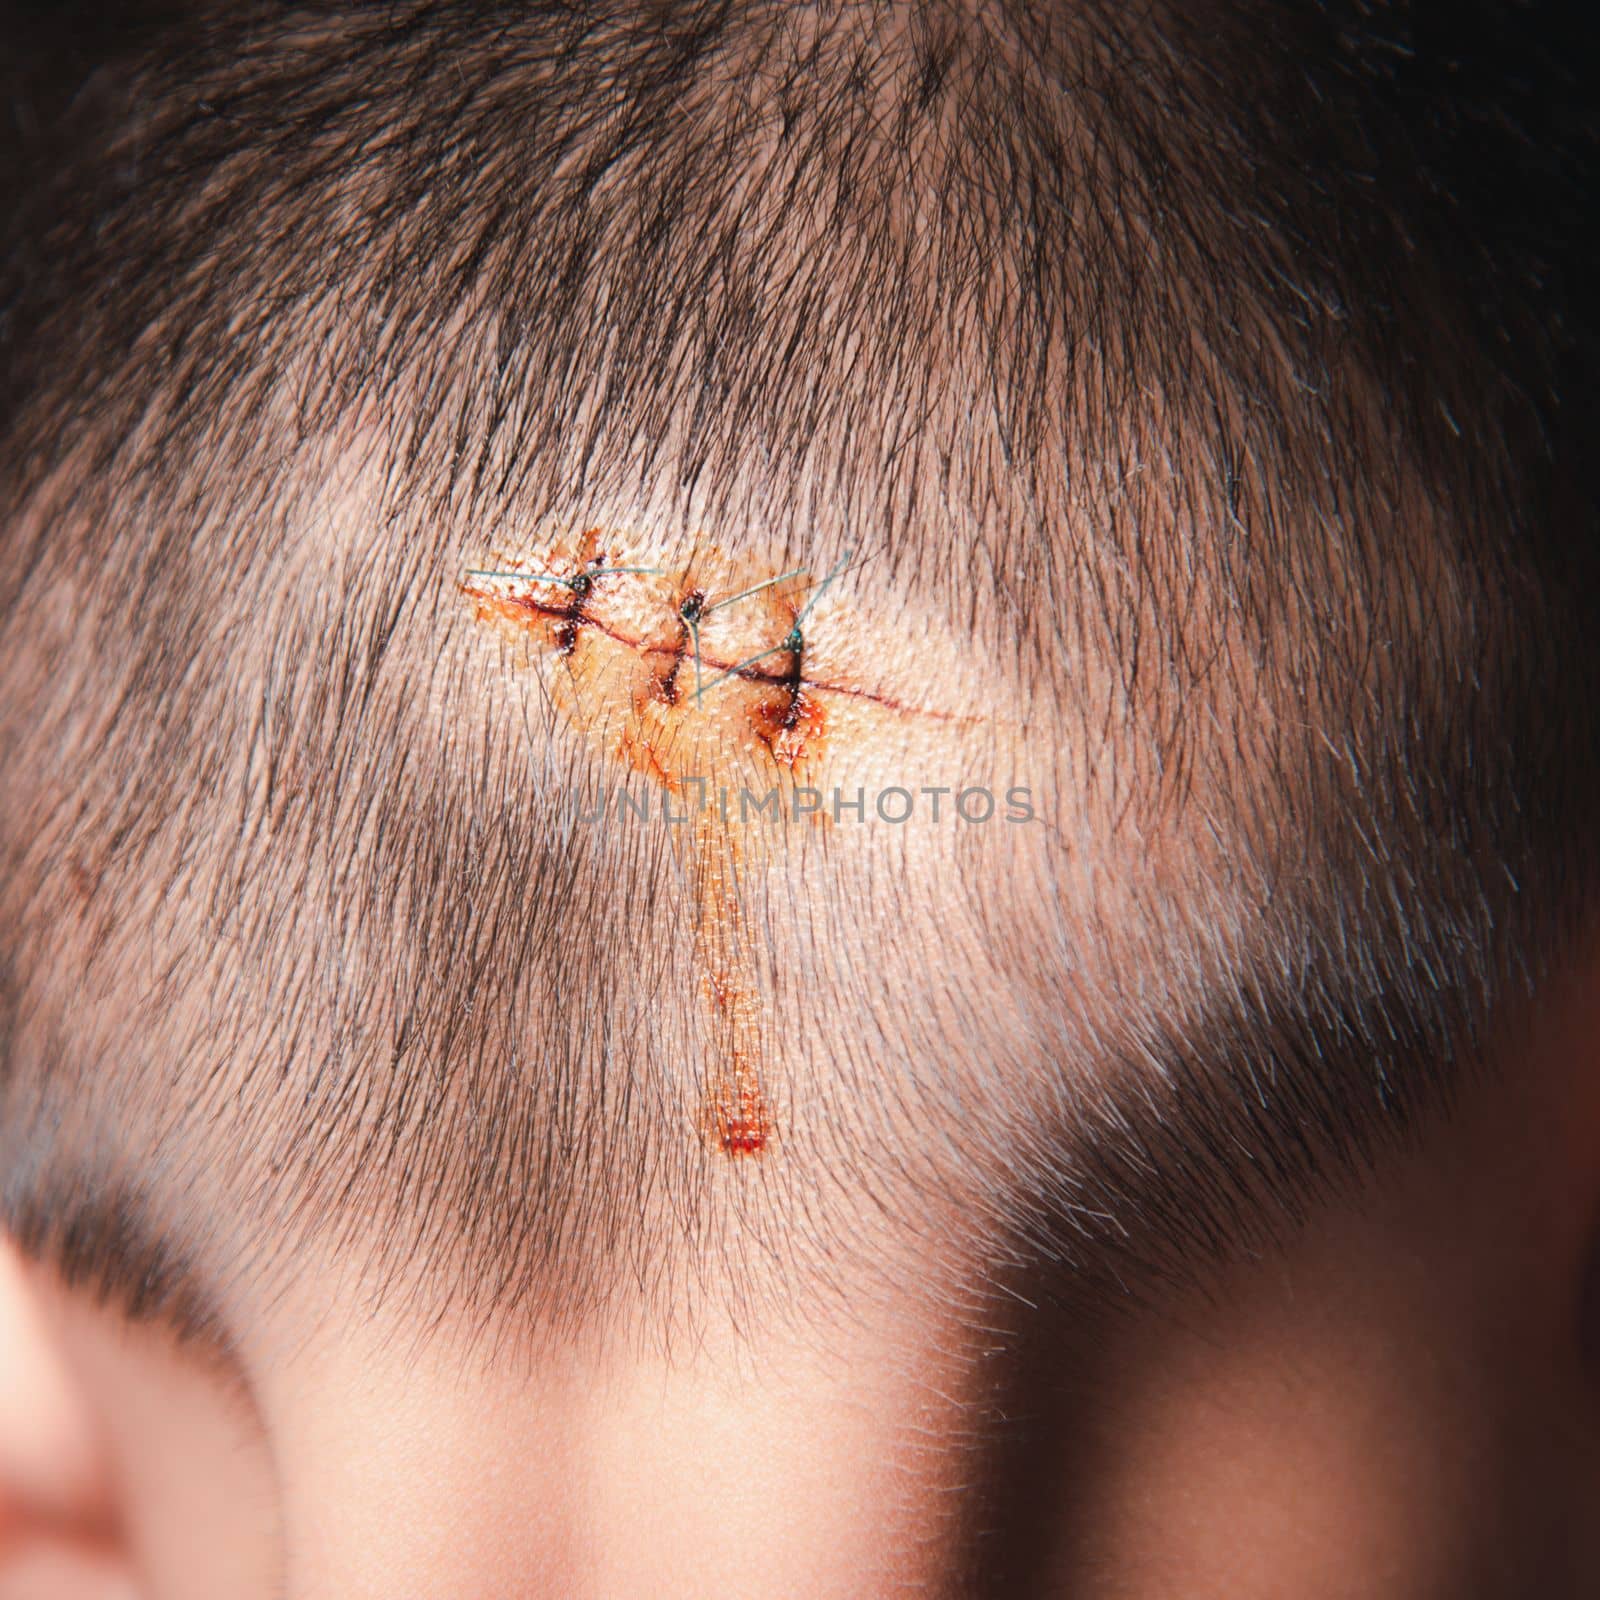 The lacerated suture wound of head which suture by nylion suture about 3 stitches by Sorapop